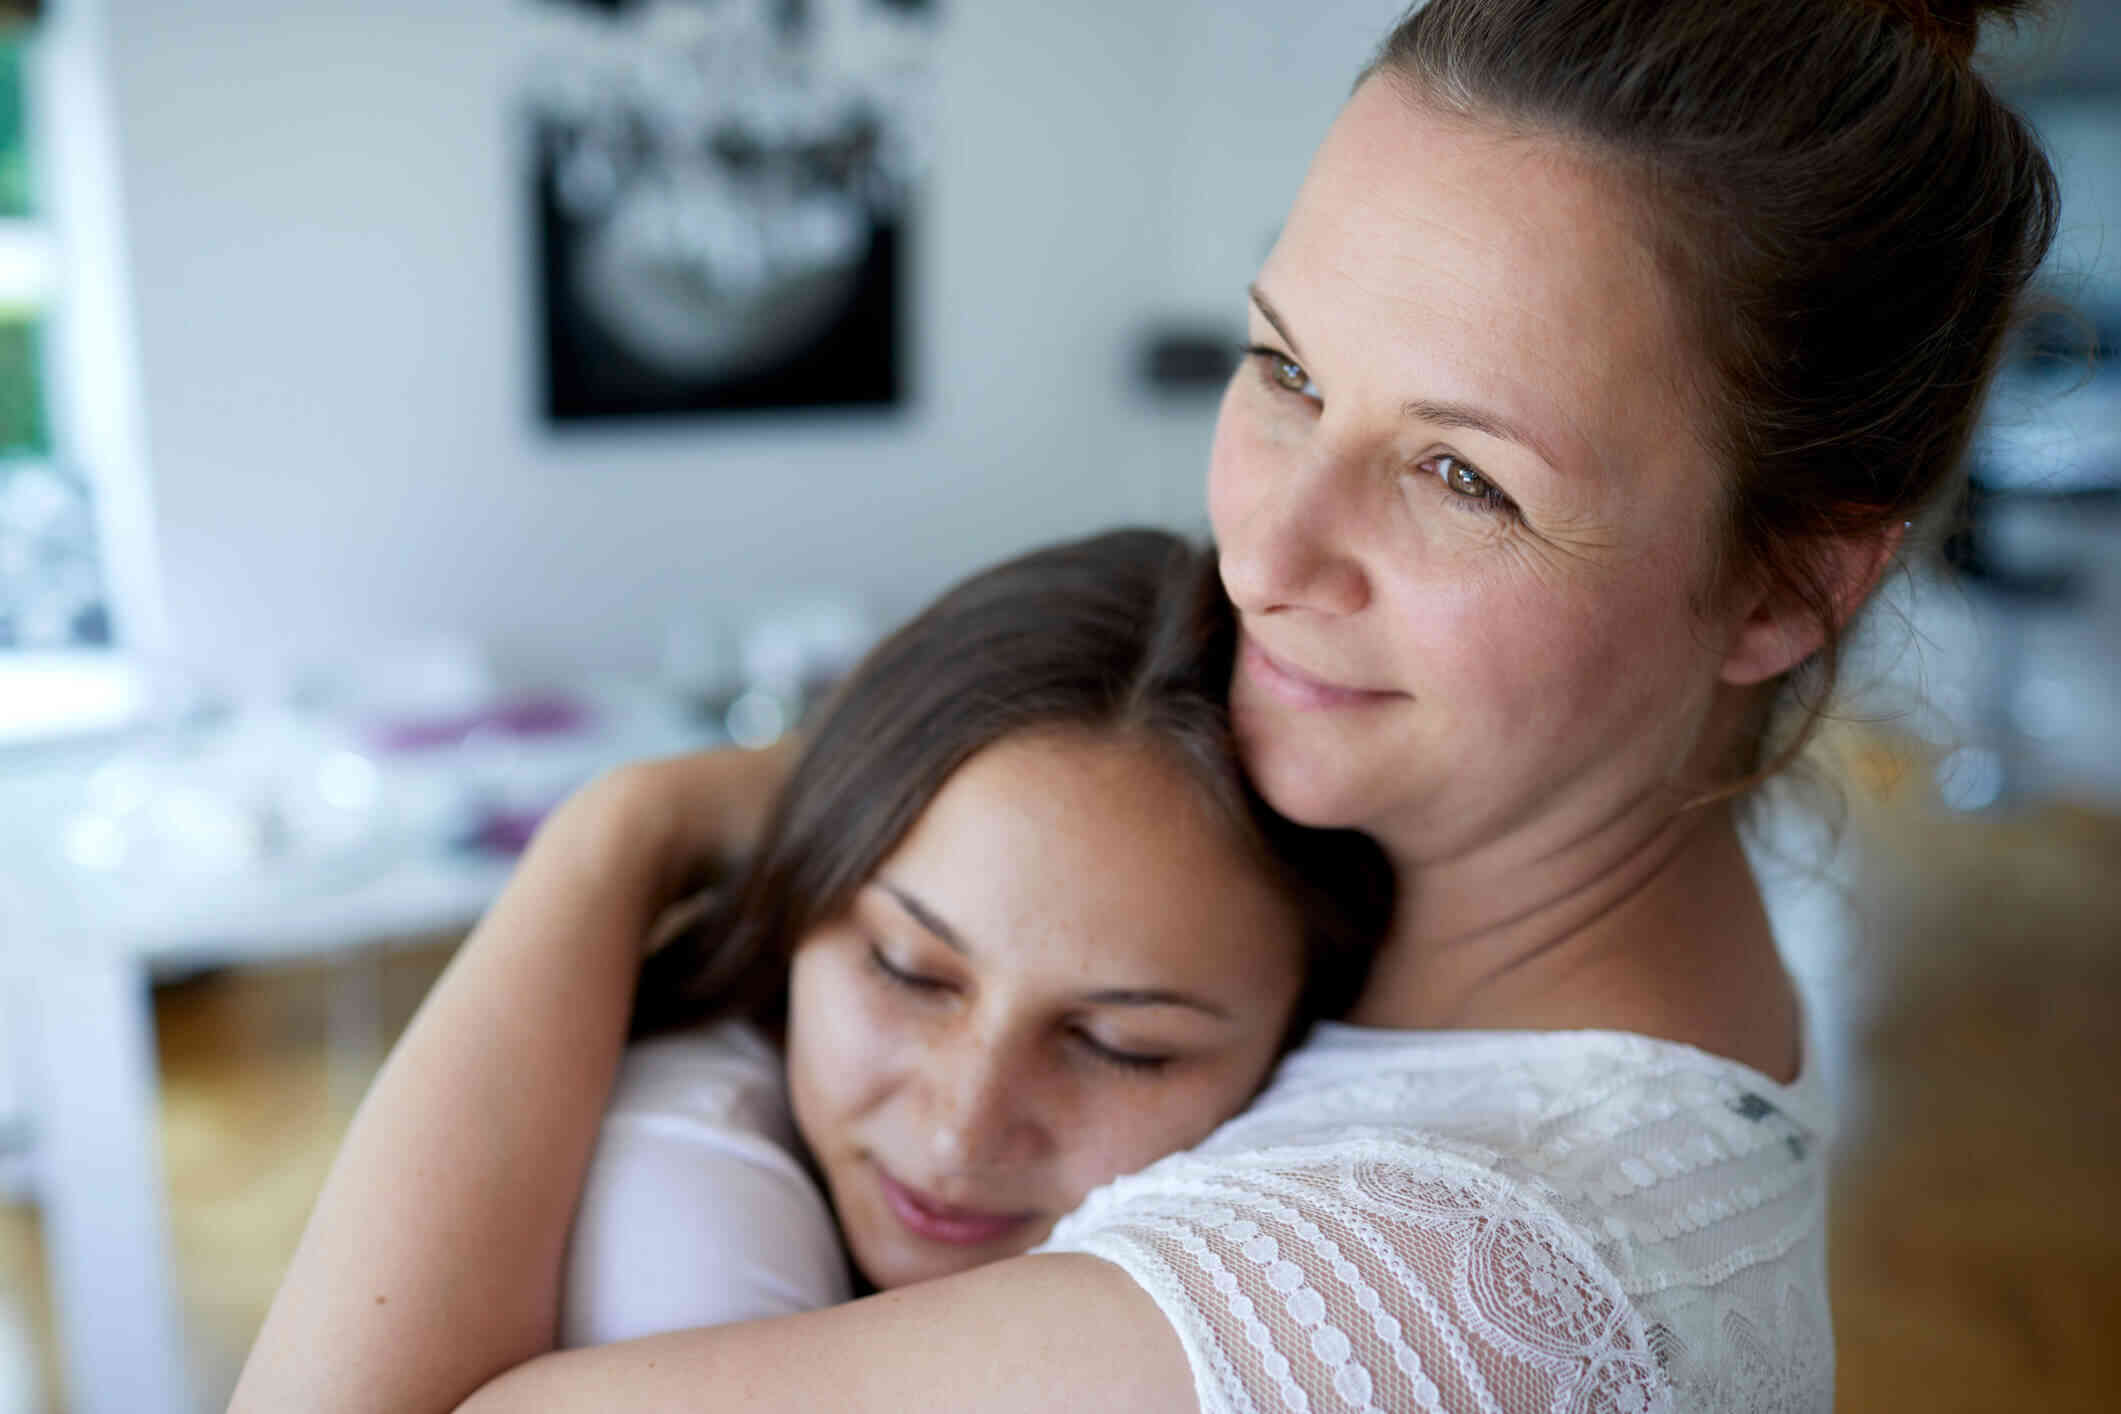 A close up of a daughter hugging her mother as the mother gazes off with a smile.